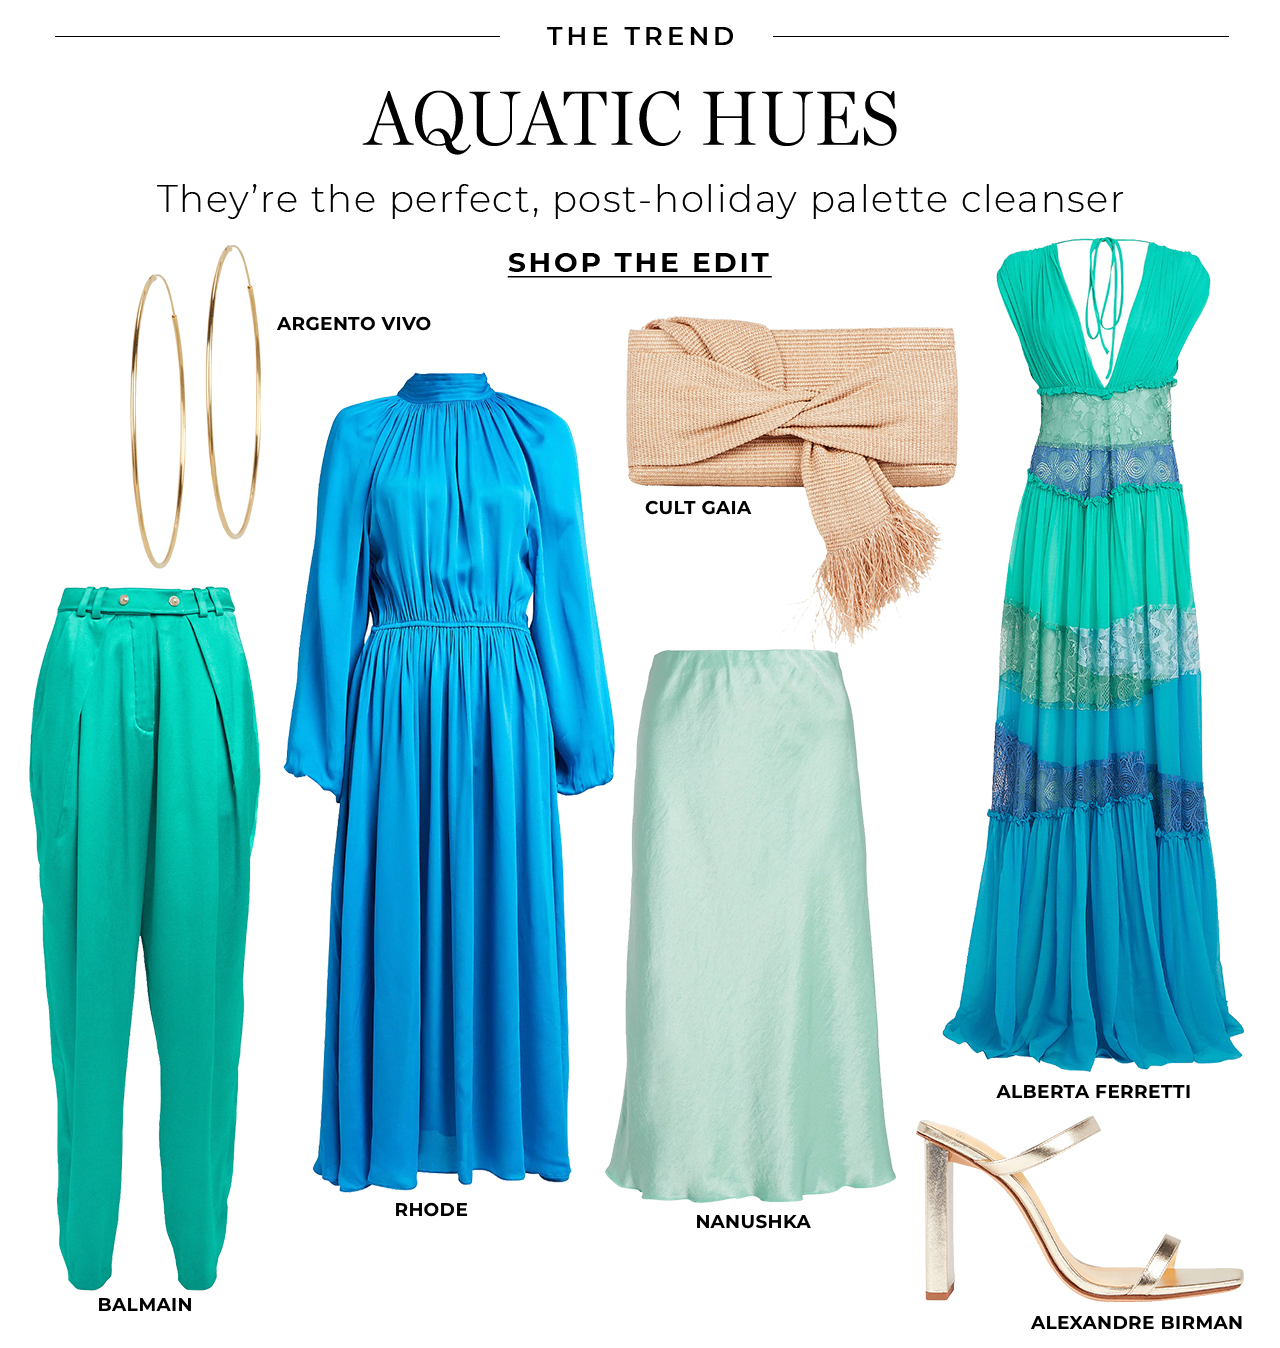 Aquatic hues are the perfect post-holiday palette cleanser 